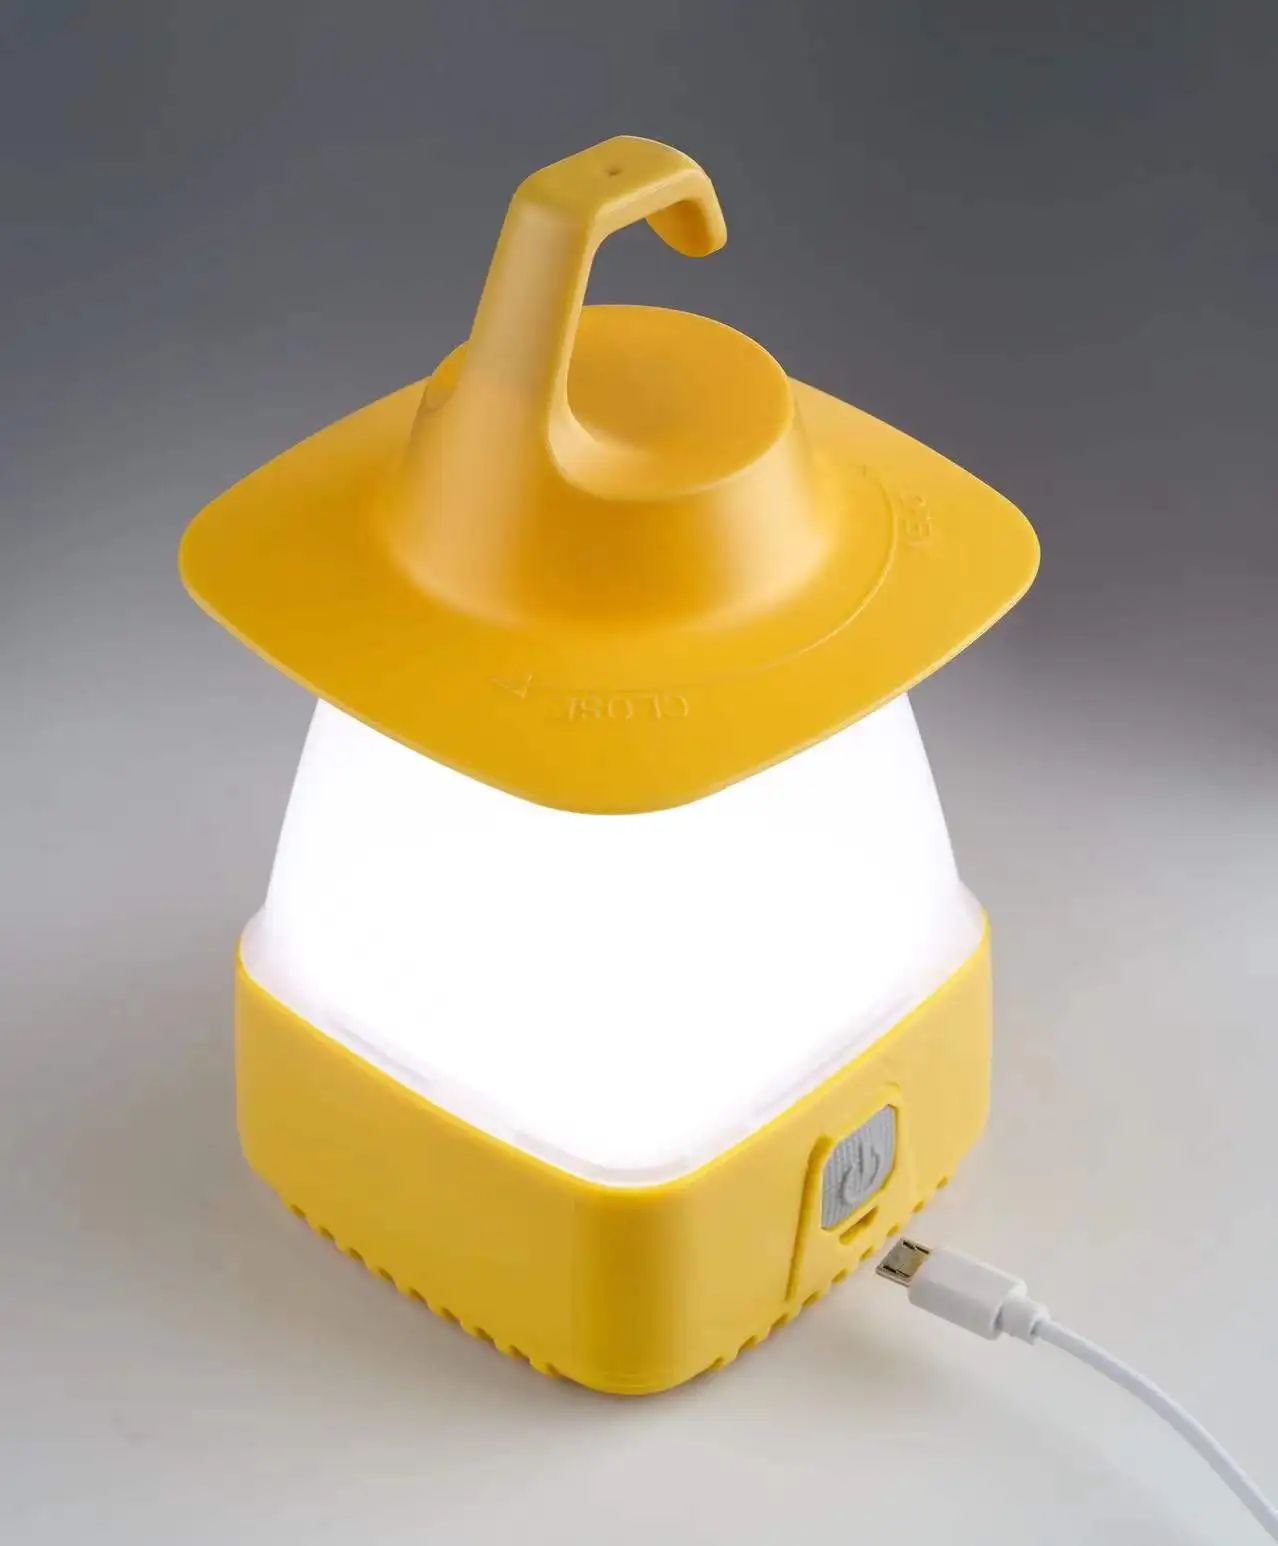 Power Emergency Light Top Selling Lamp With Usb Type C Charging For Kids Lantern Night Light